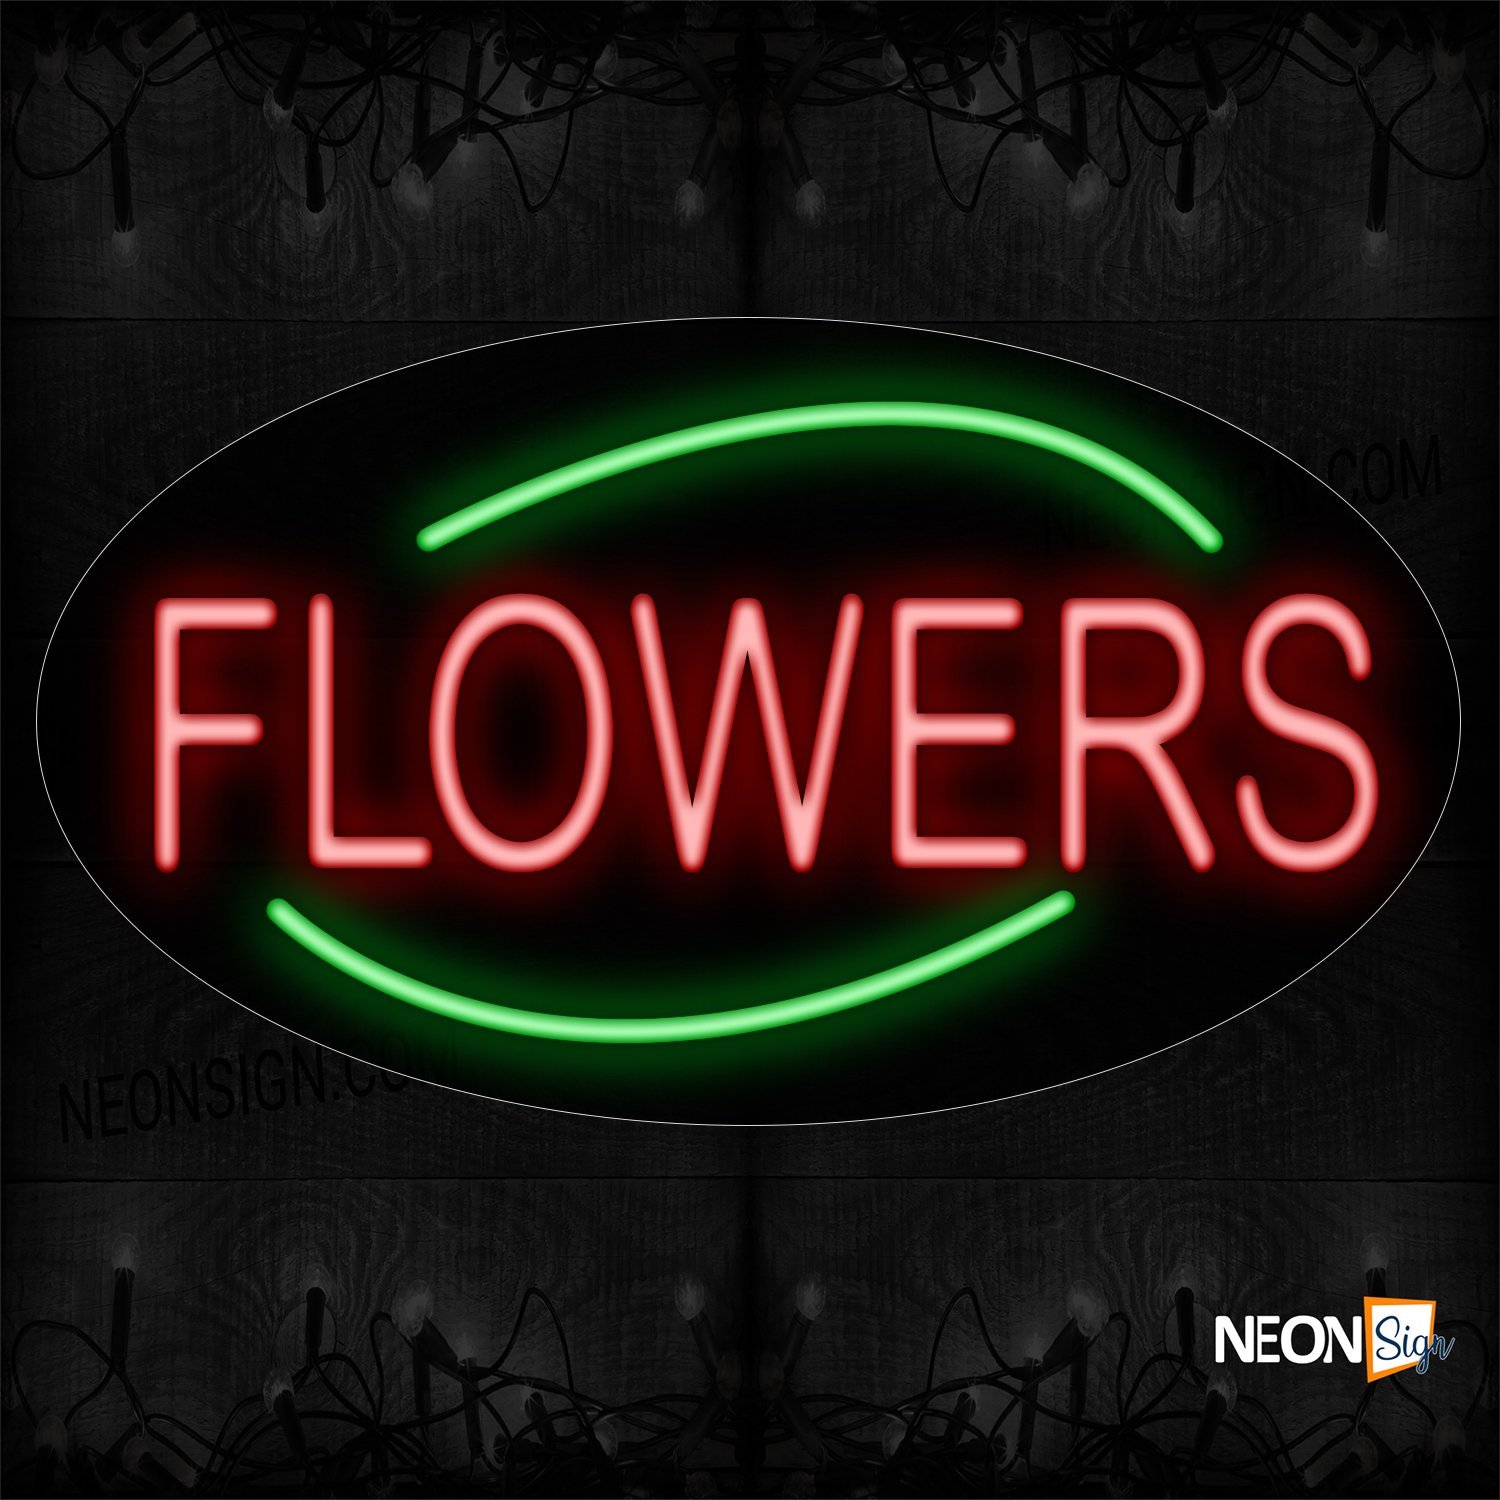 Image of 14206Flowers All Caps And Green Ellipse Traditional Neon_17x30 Contoured Black Backing